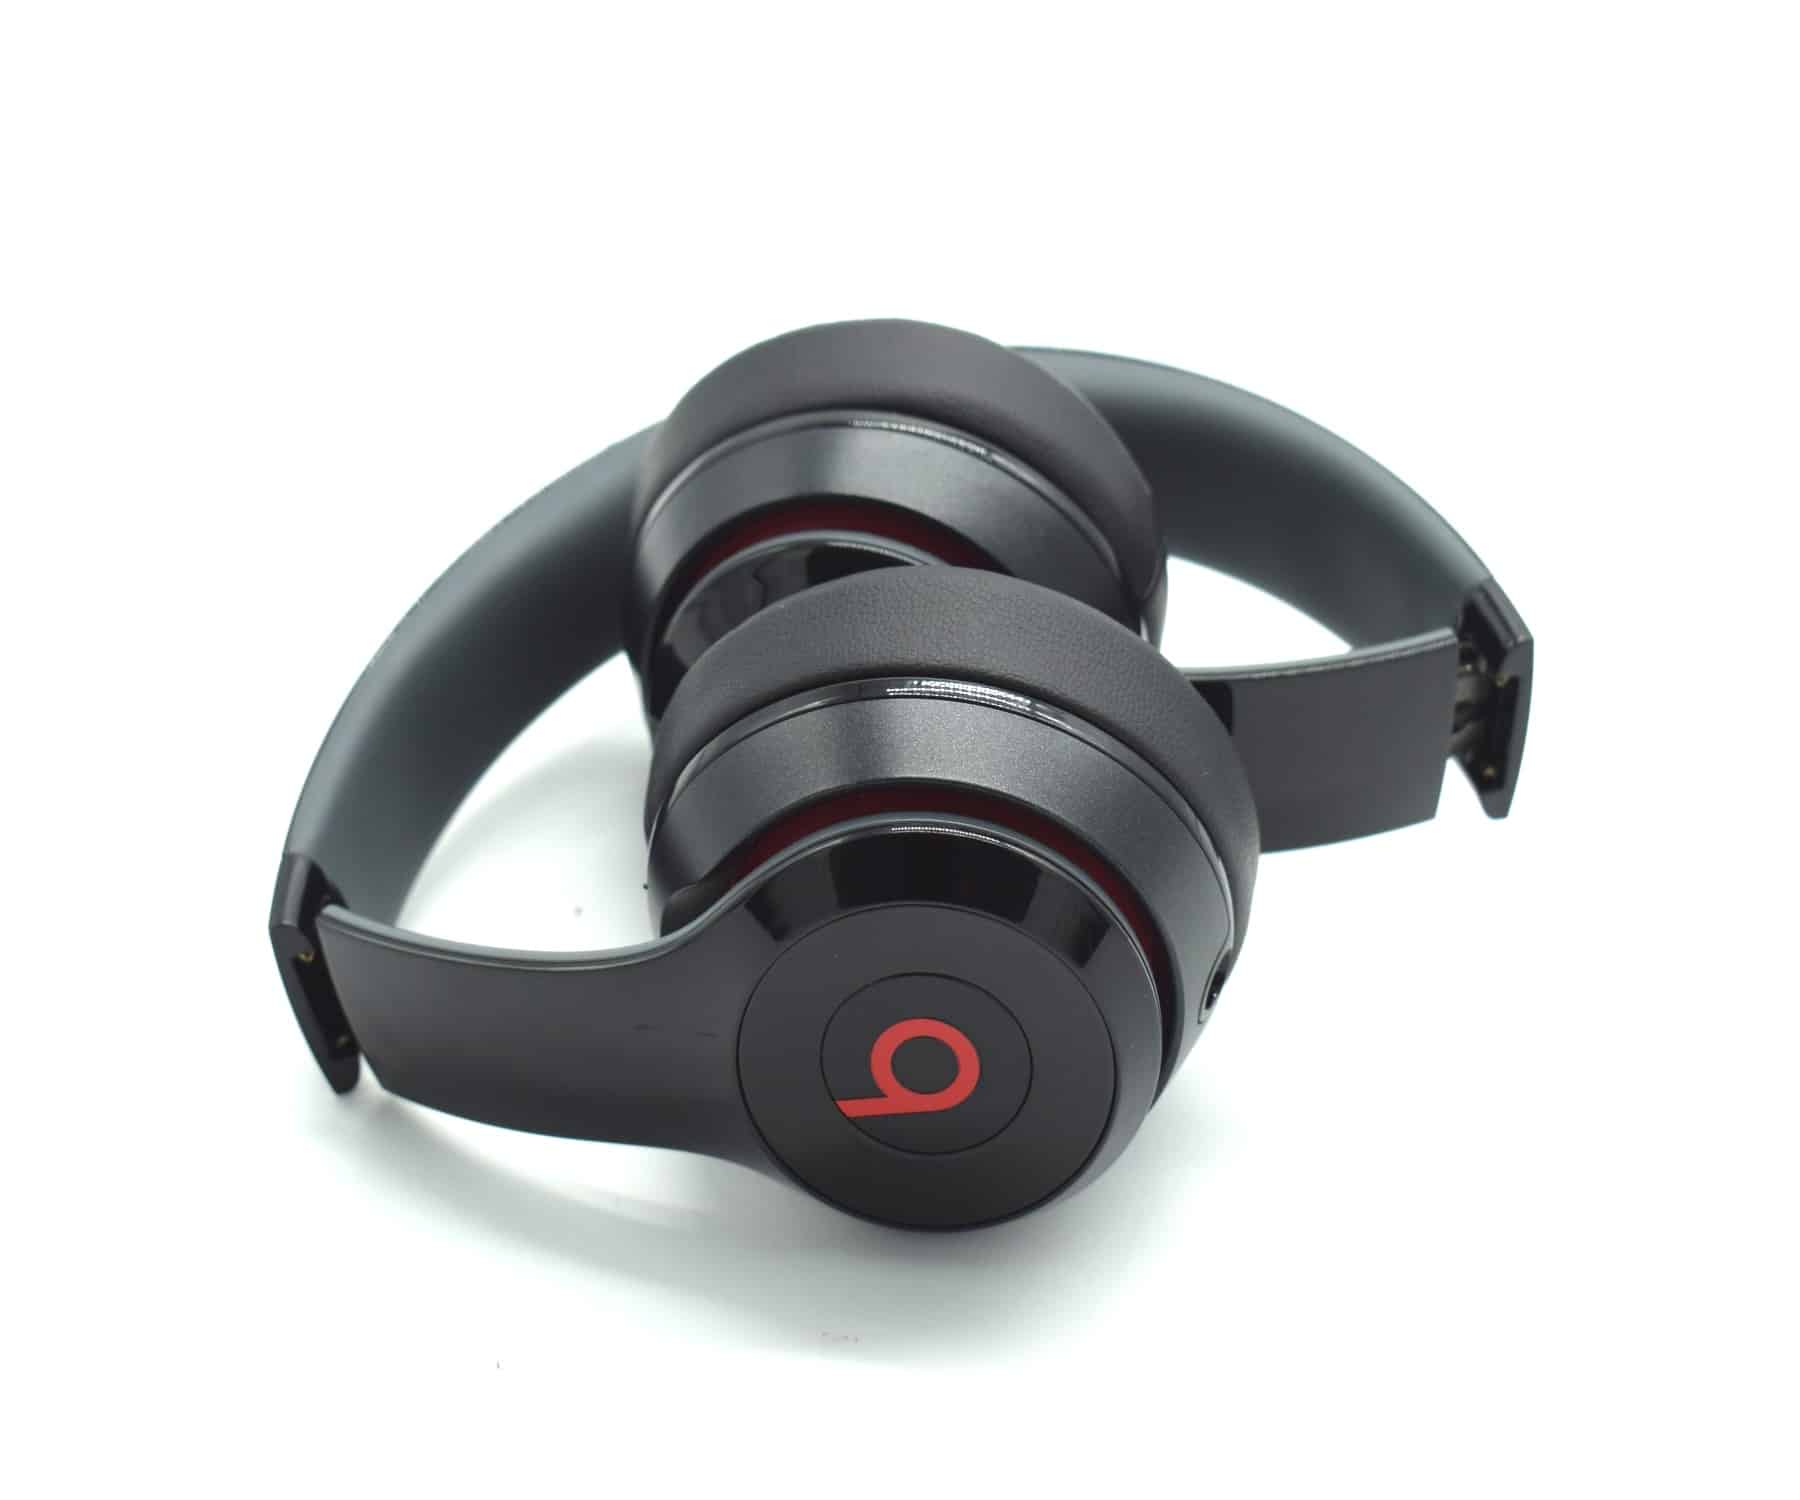 Beats by Dr Dre Solo 3.0 Wireless Bluetooth Headphones Black Red